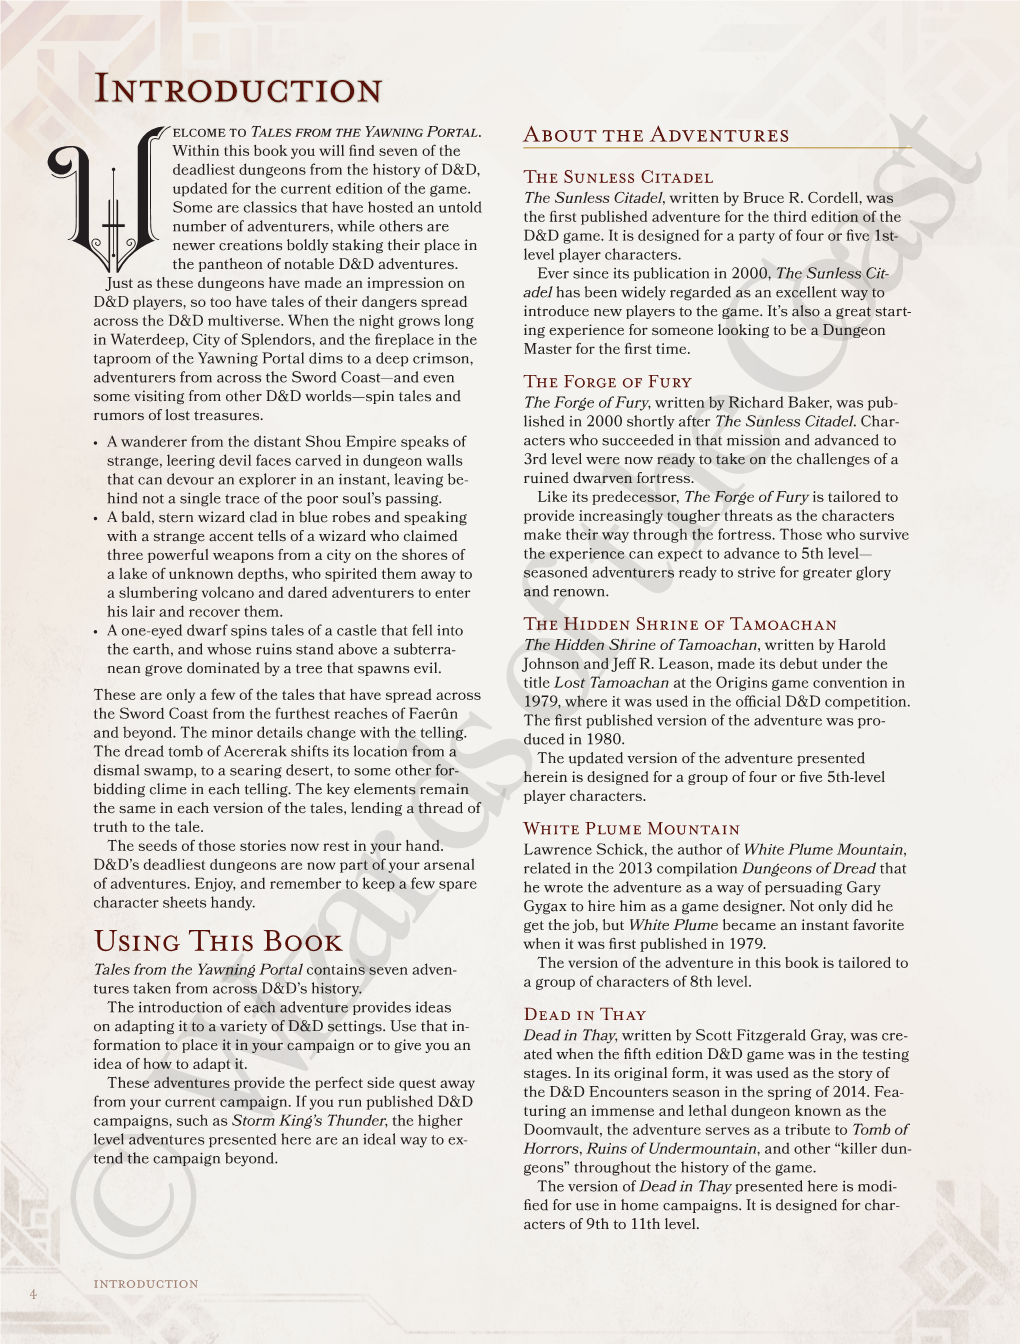 Introduction Elcome to Tales from the Yawning Portal